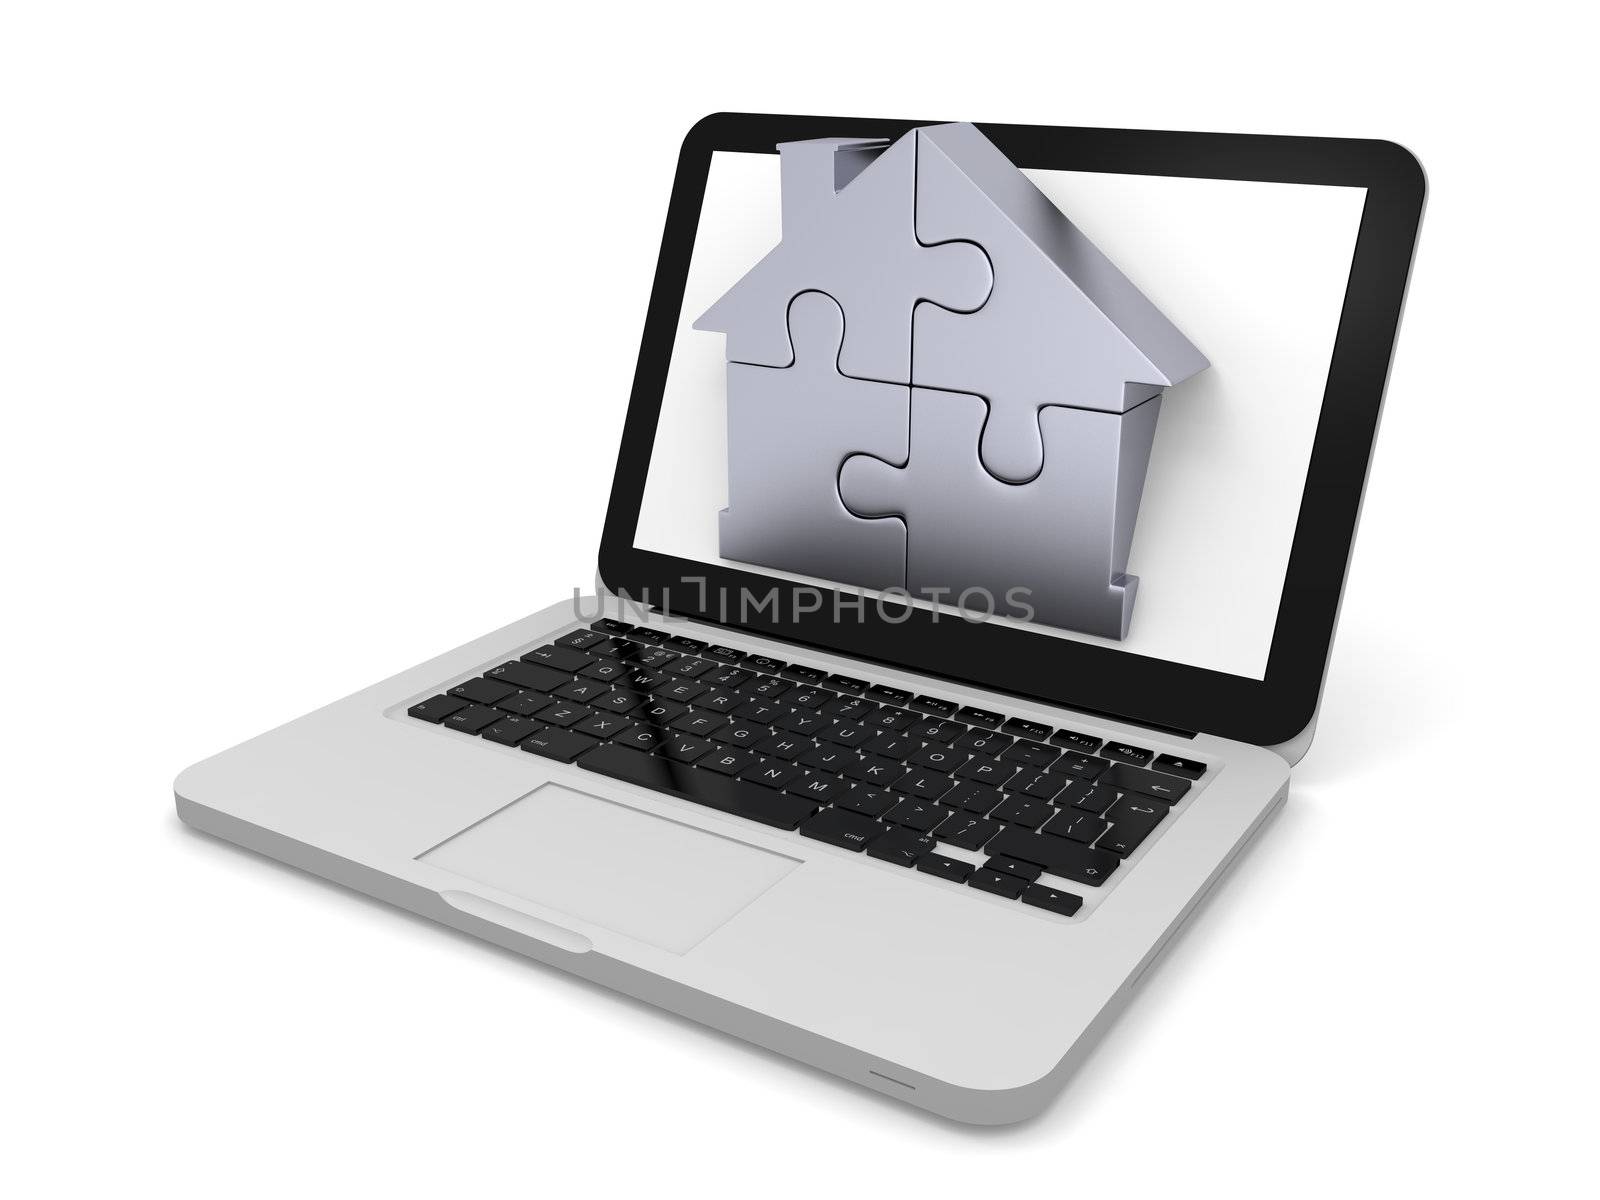 Home jigsaw on laptop screen by Harvepino